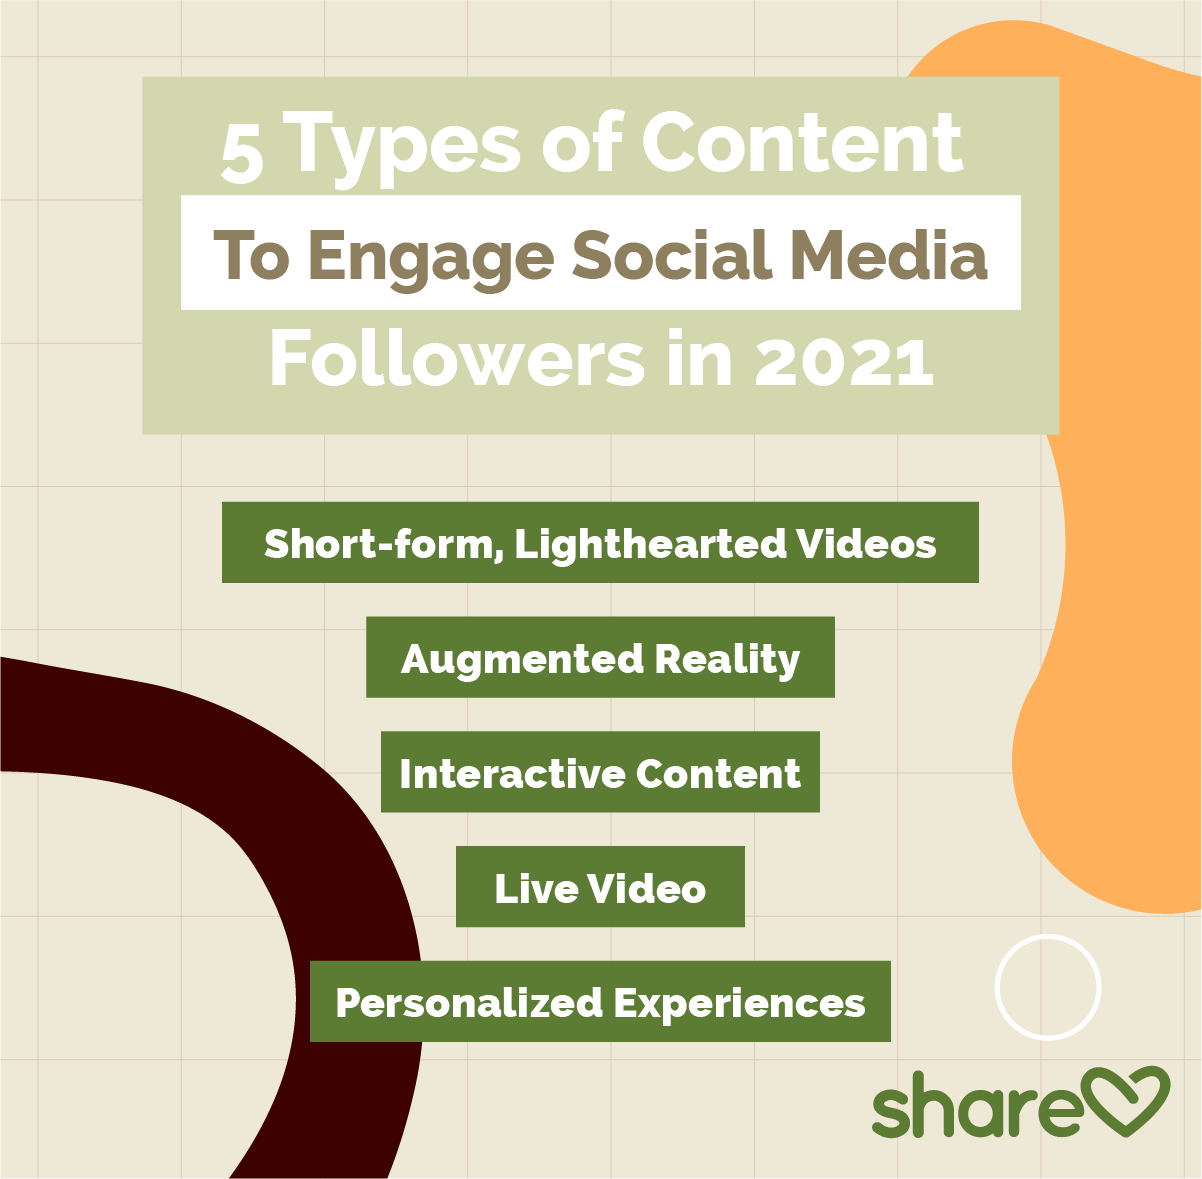 5 types of content to engage social media followers in 2021